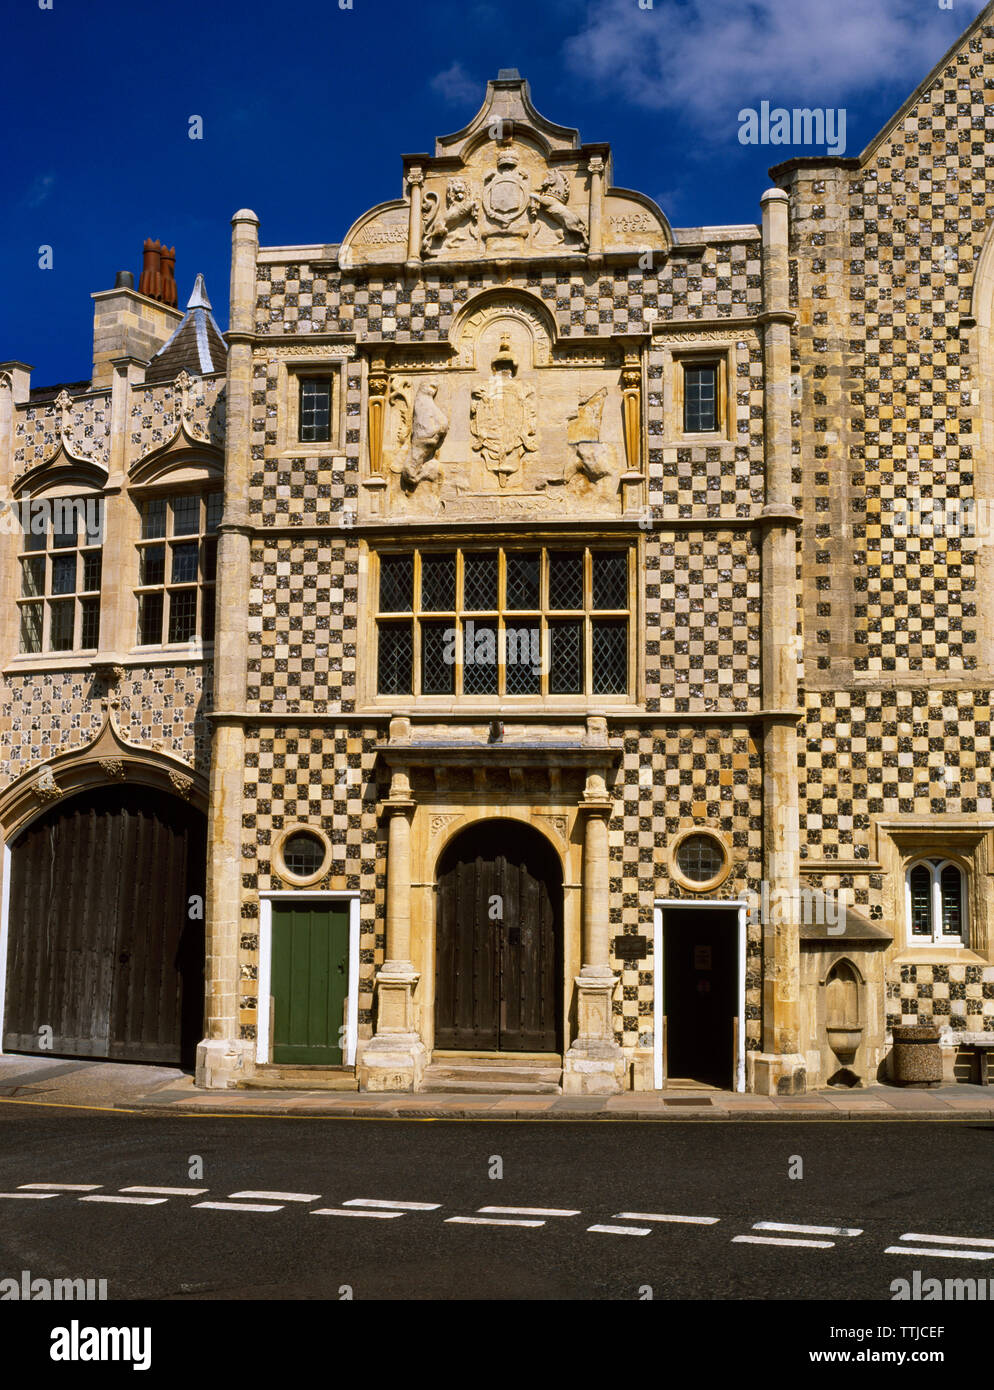 Entrance porch of Holy Trinity Guildhall, King's Lynn, Norfolk, UK, rebuilt in 1422 with dazzling chequer work of stone and knapped flint flushwork. Stock Photo